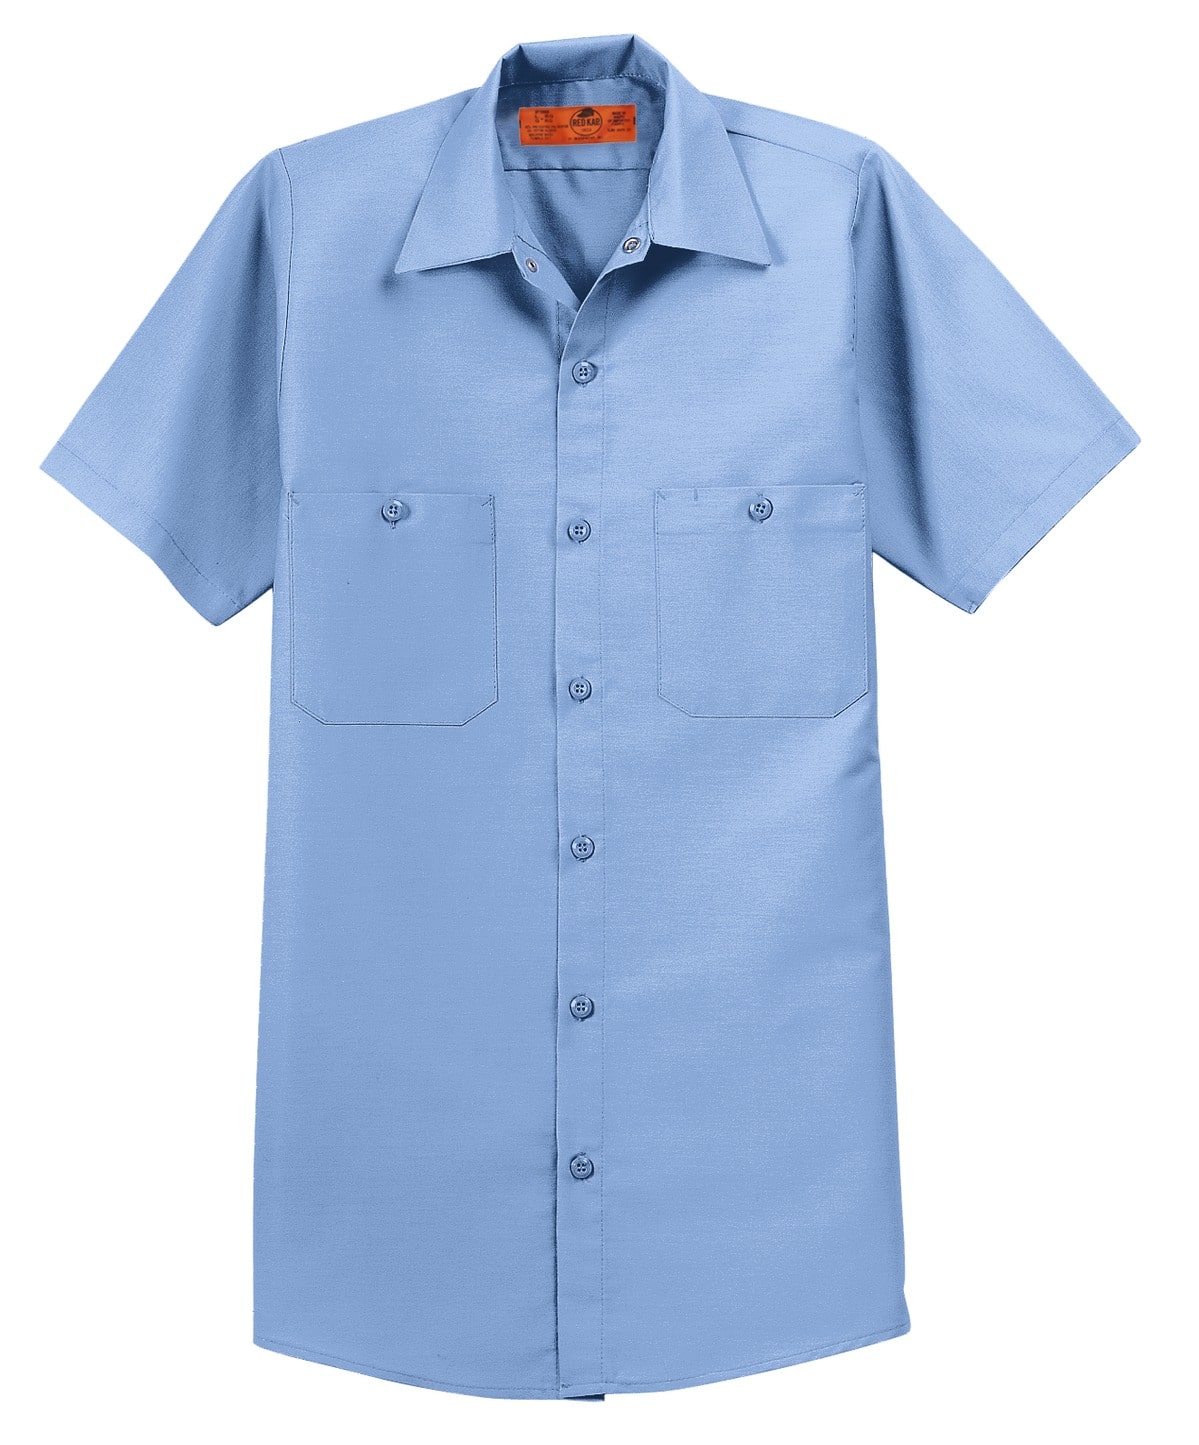 Red Kap ® Short Sleeve Industrial Work Shirt | Colman and Company